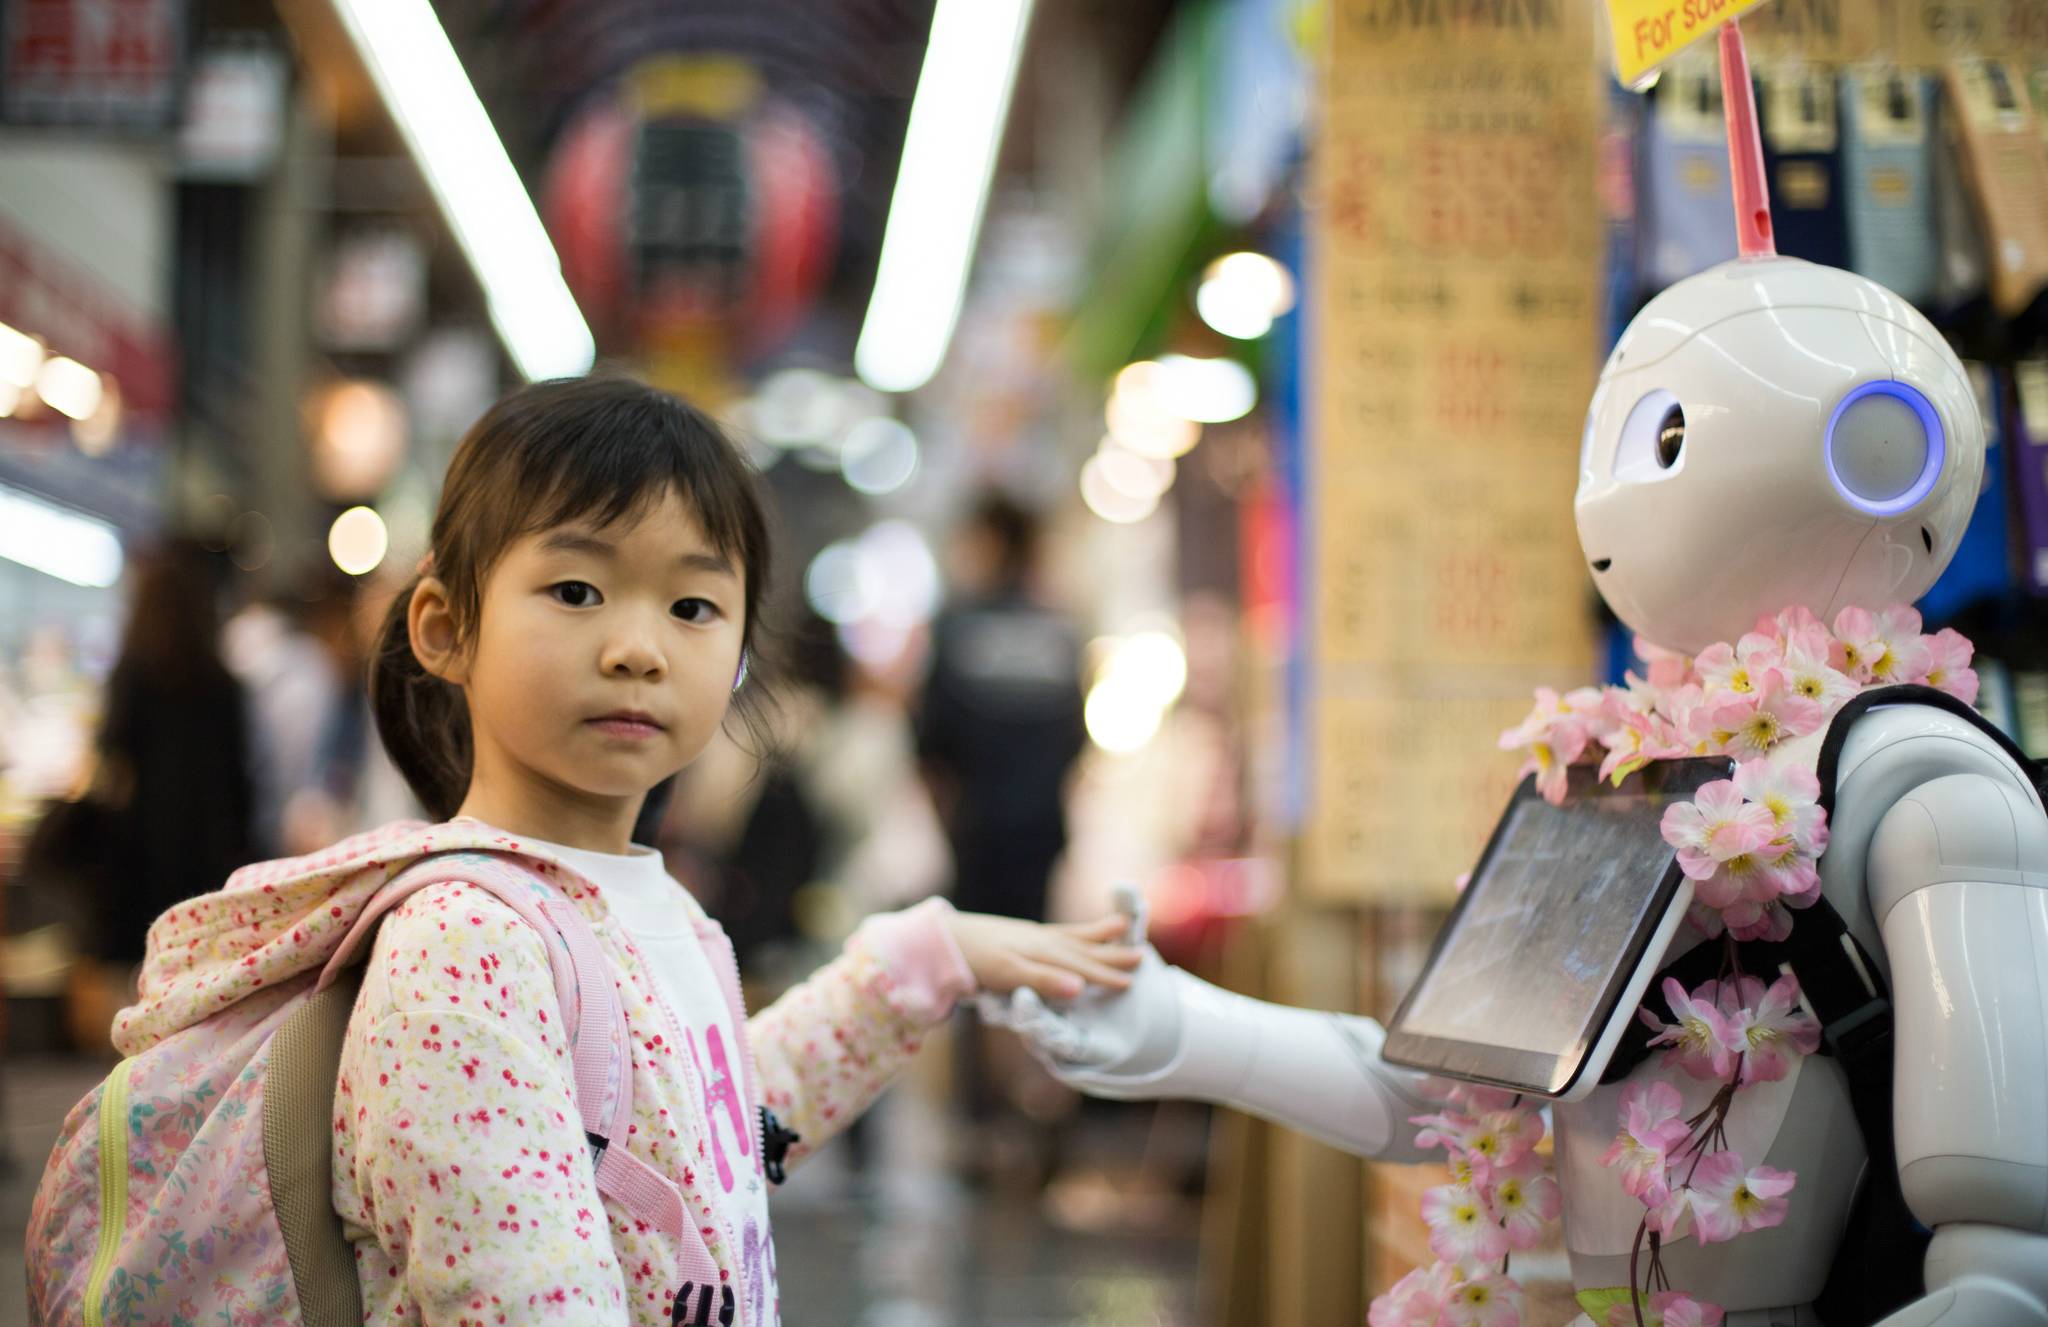 Robots will provide retail customer service in Japan